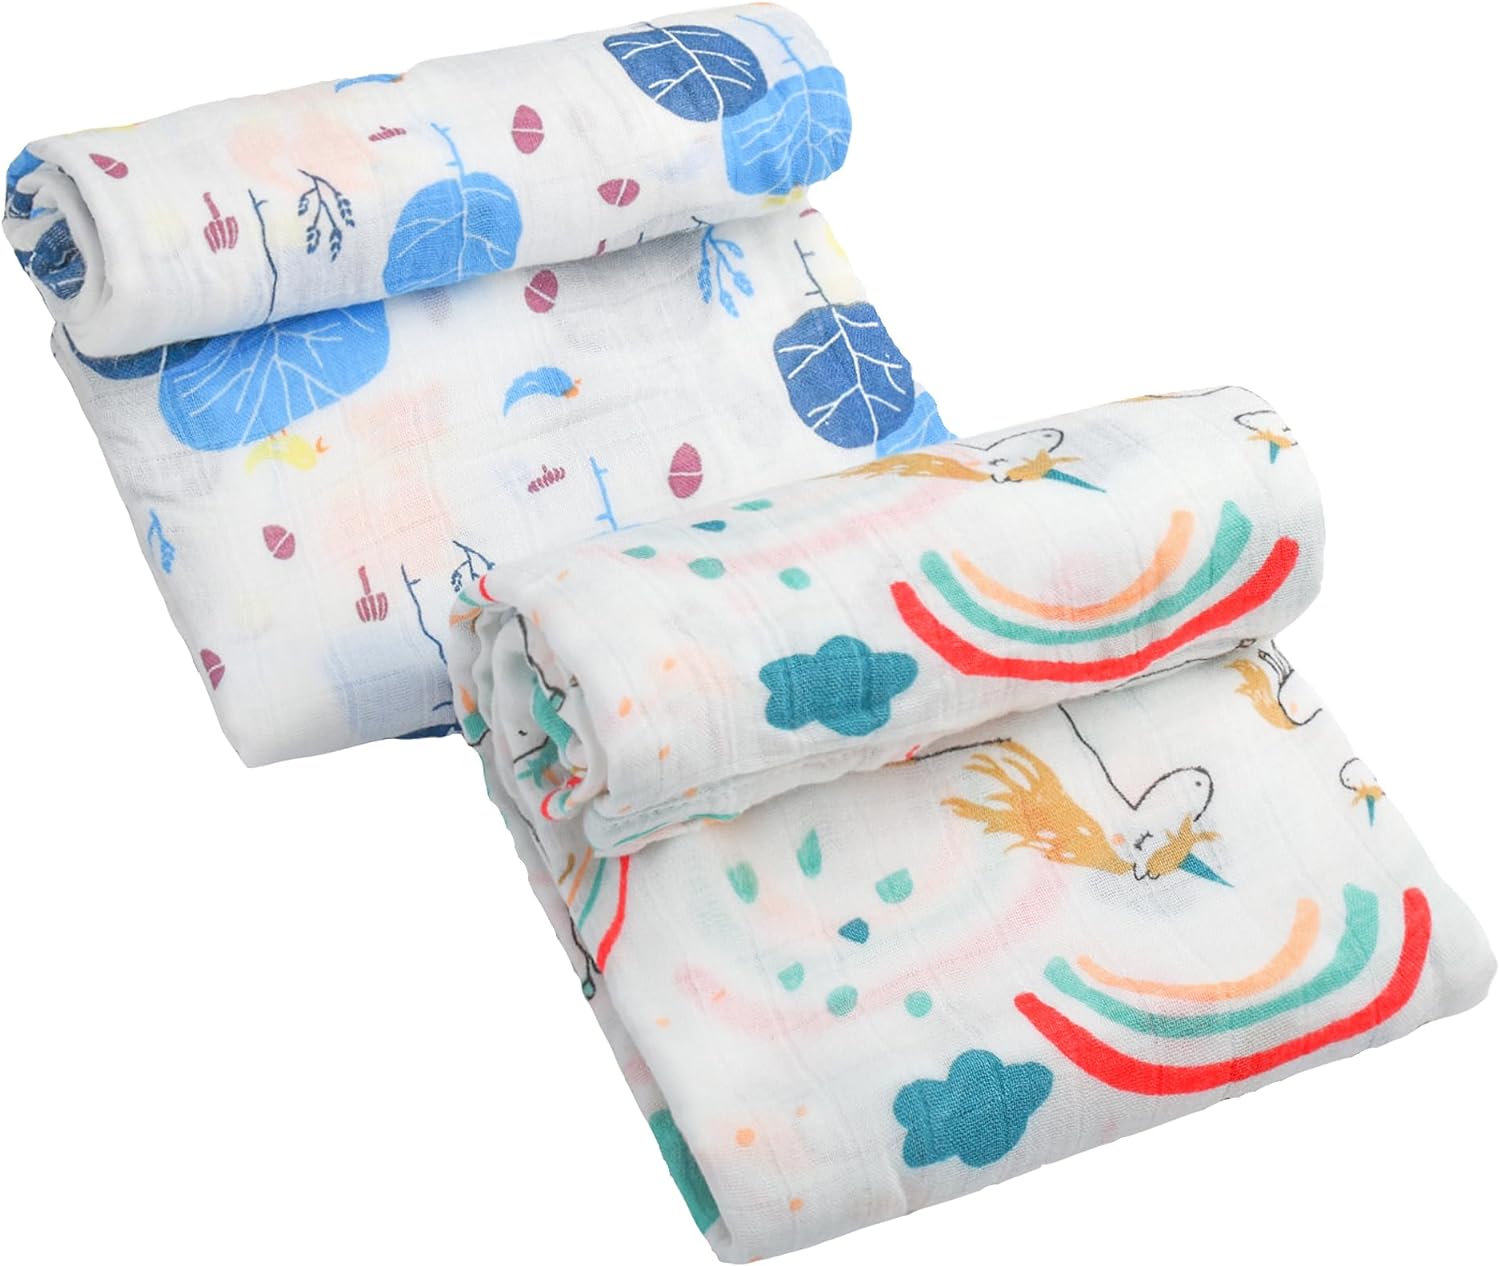 Baby Swaddle Blankets Bamboo Swaddle Blanket Breathable and Skin-Friendly 2 Pack Baby Swaddling Large 47 x 47 inches Wrap for Baby Boys and Girls Infant Receiving Blankets